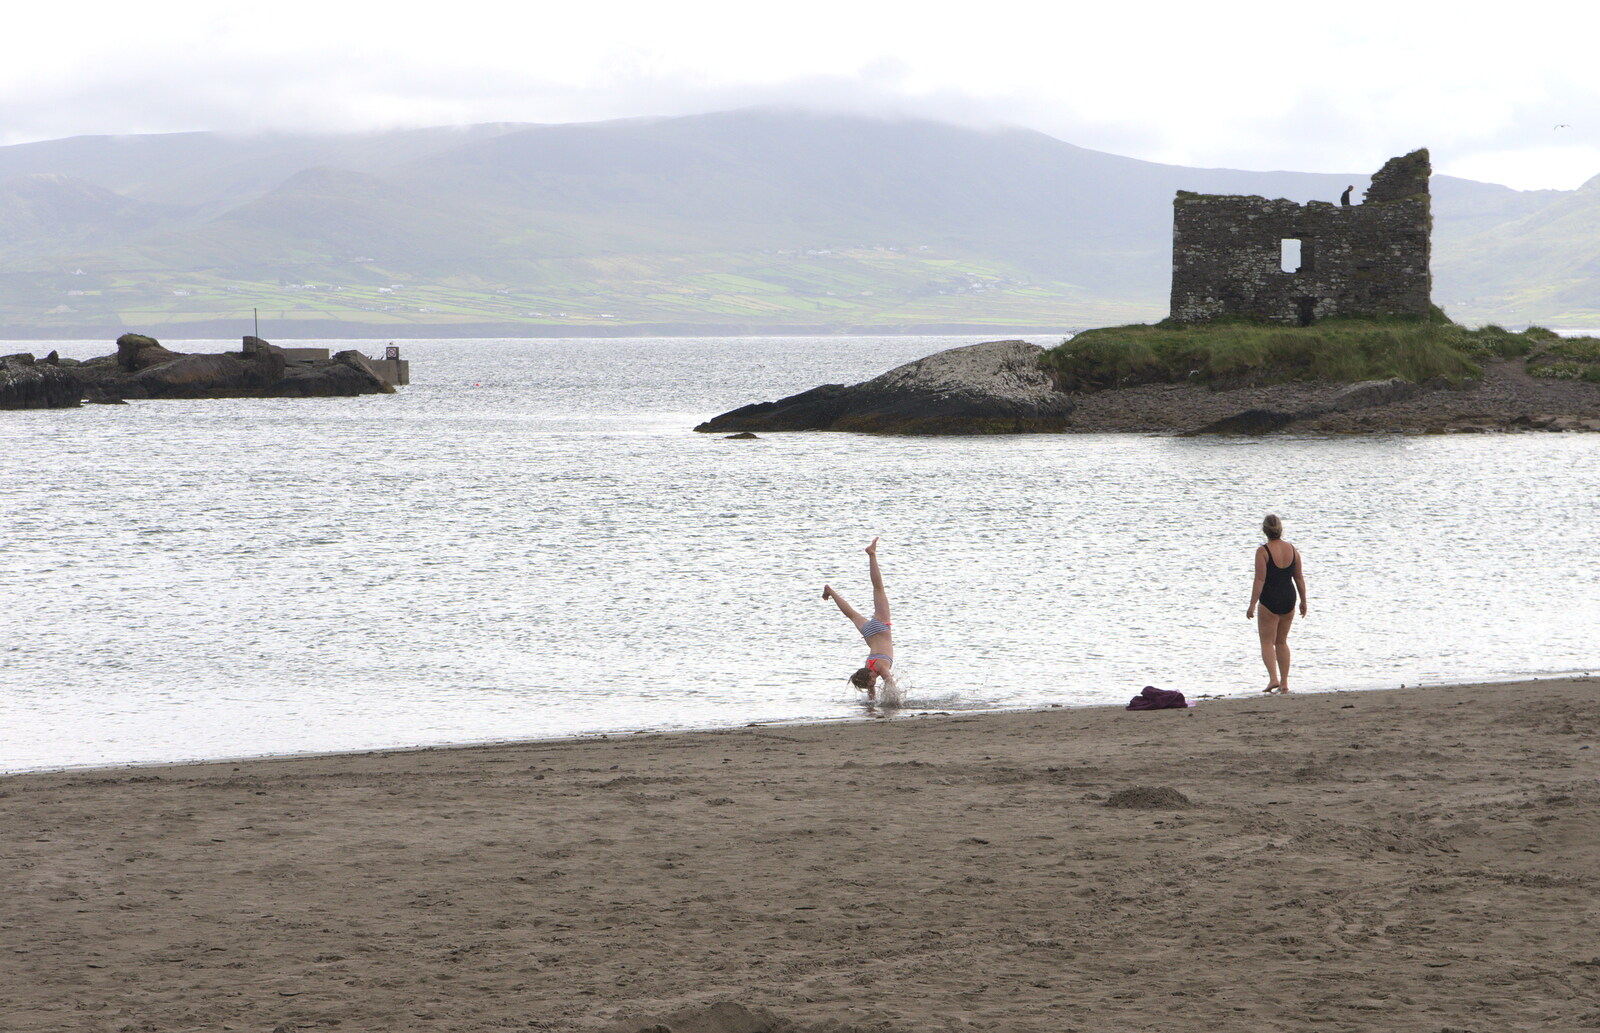 Some girl does cartwheels in the sea from Baile an Sceilg to An tSnaidhme, Co. Kerry, Ireland - 31st July 2017